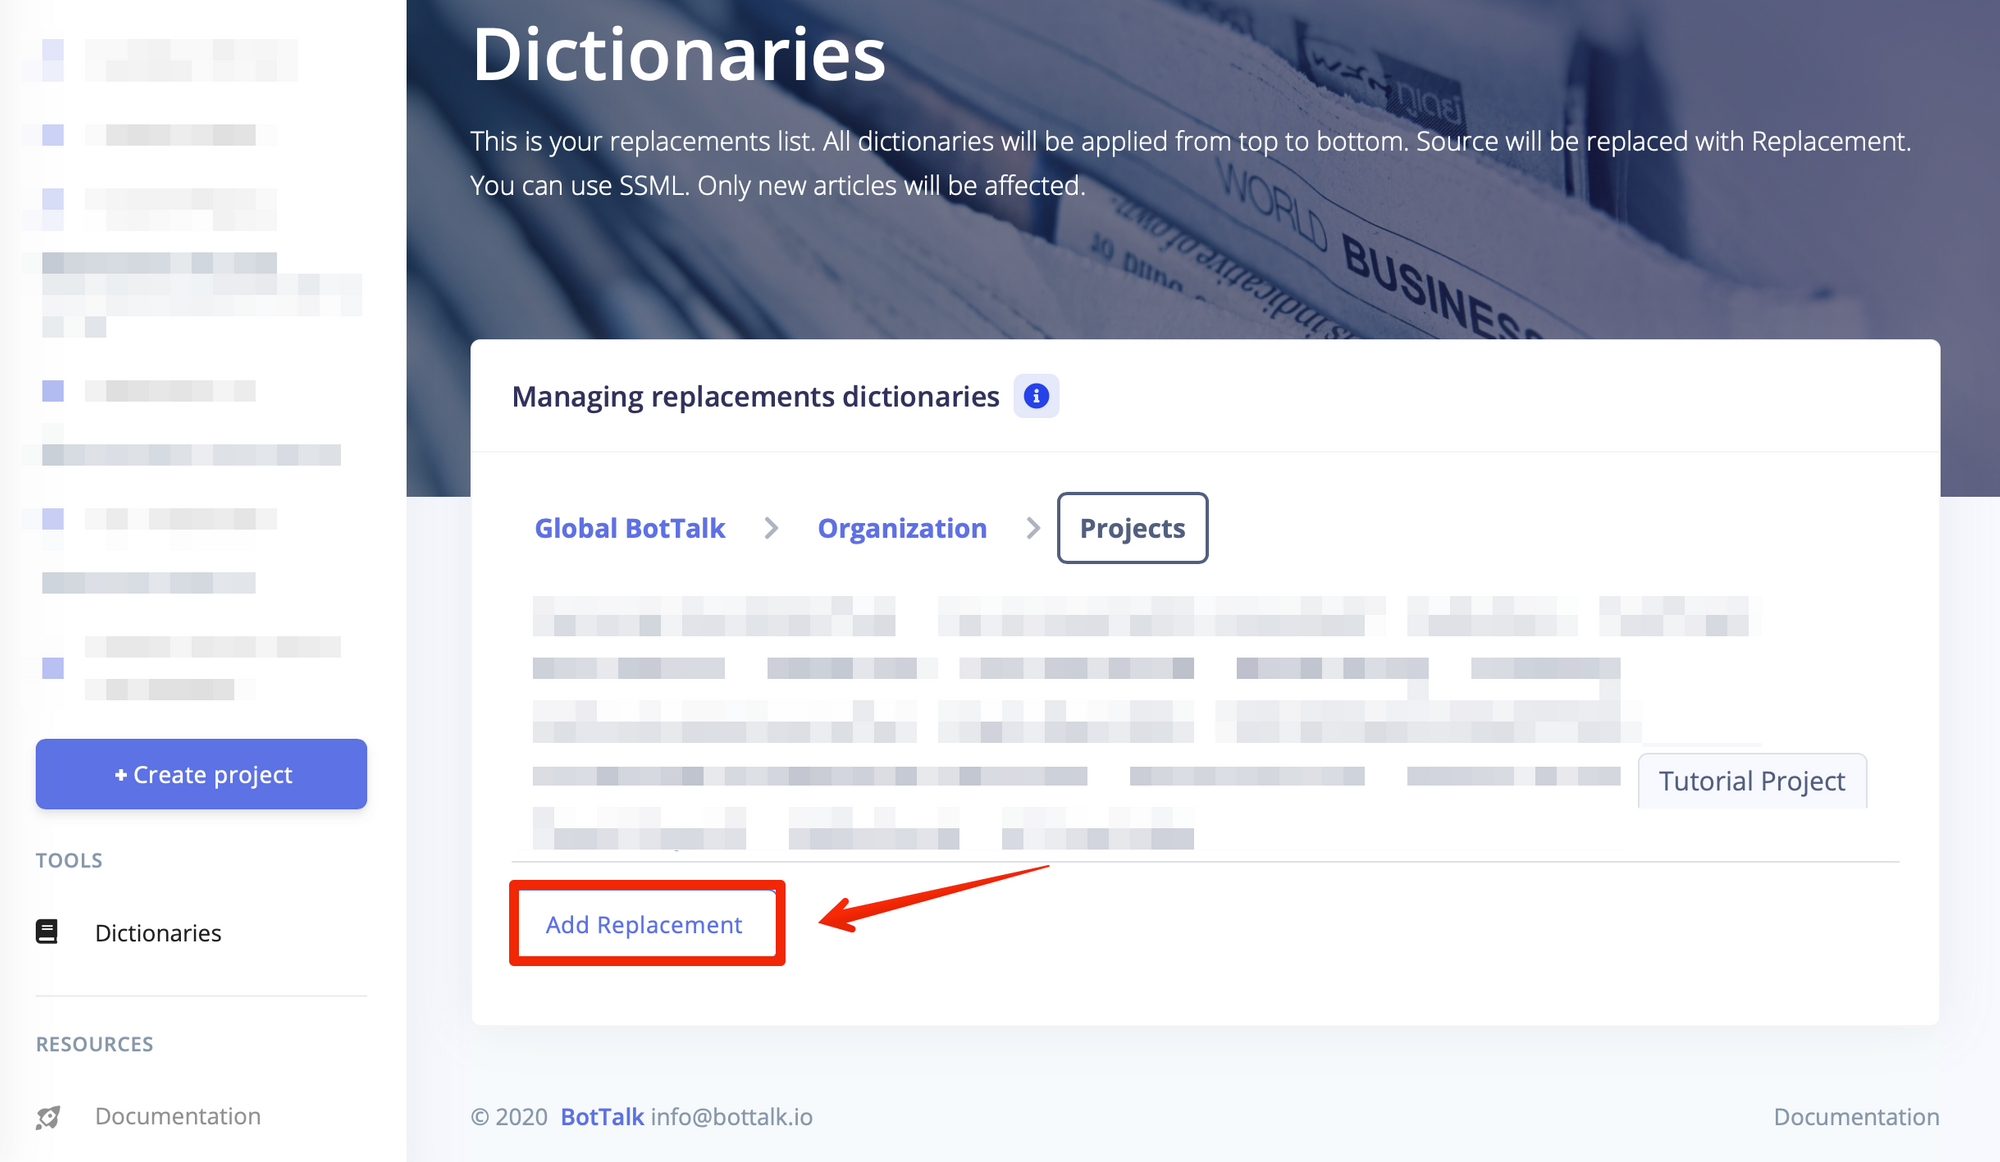 In Dictionaries you have BotTalks Global, Organisational and Project Dictionaries